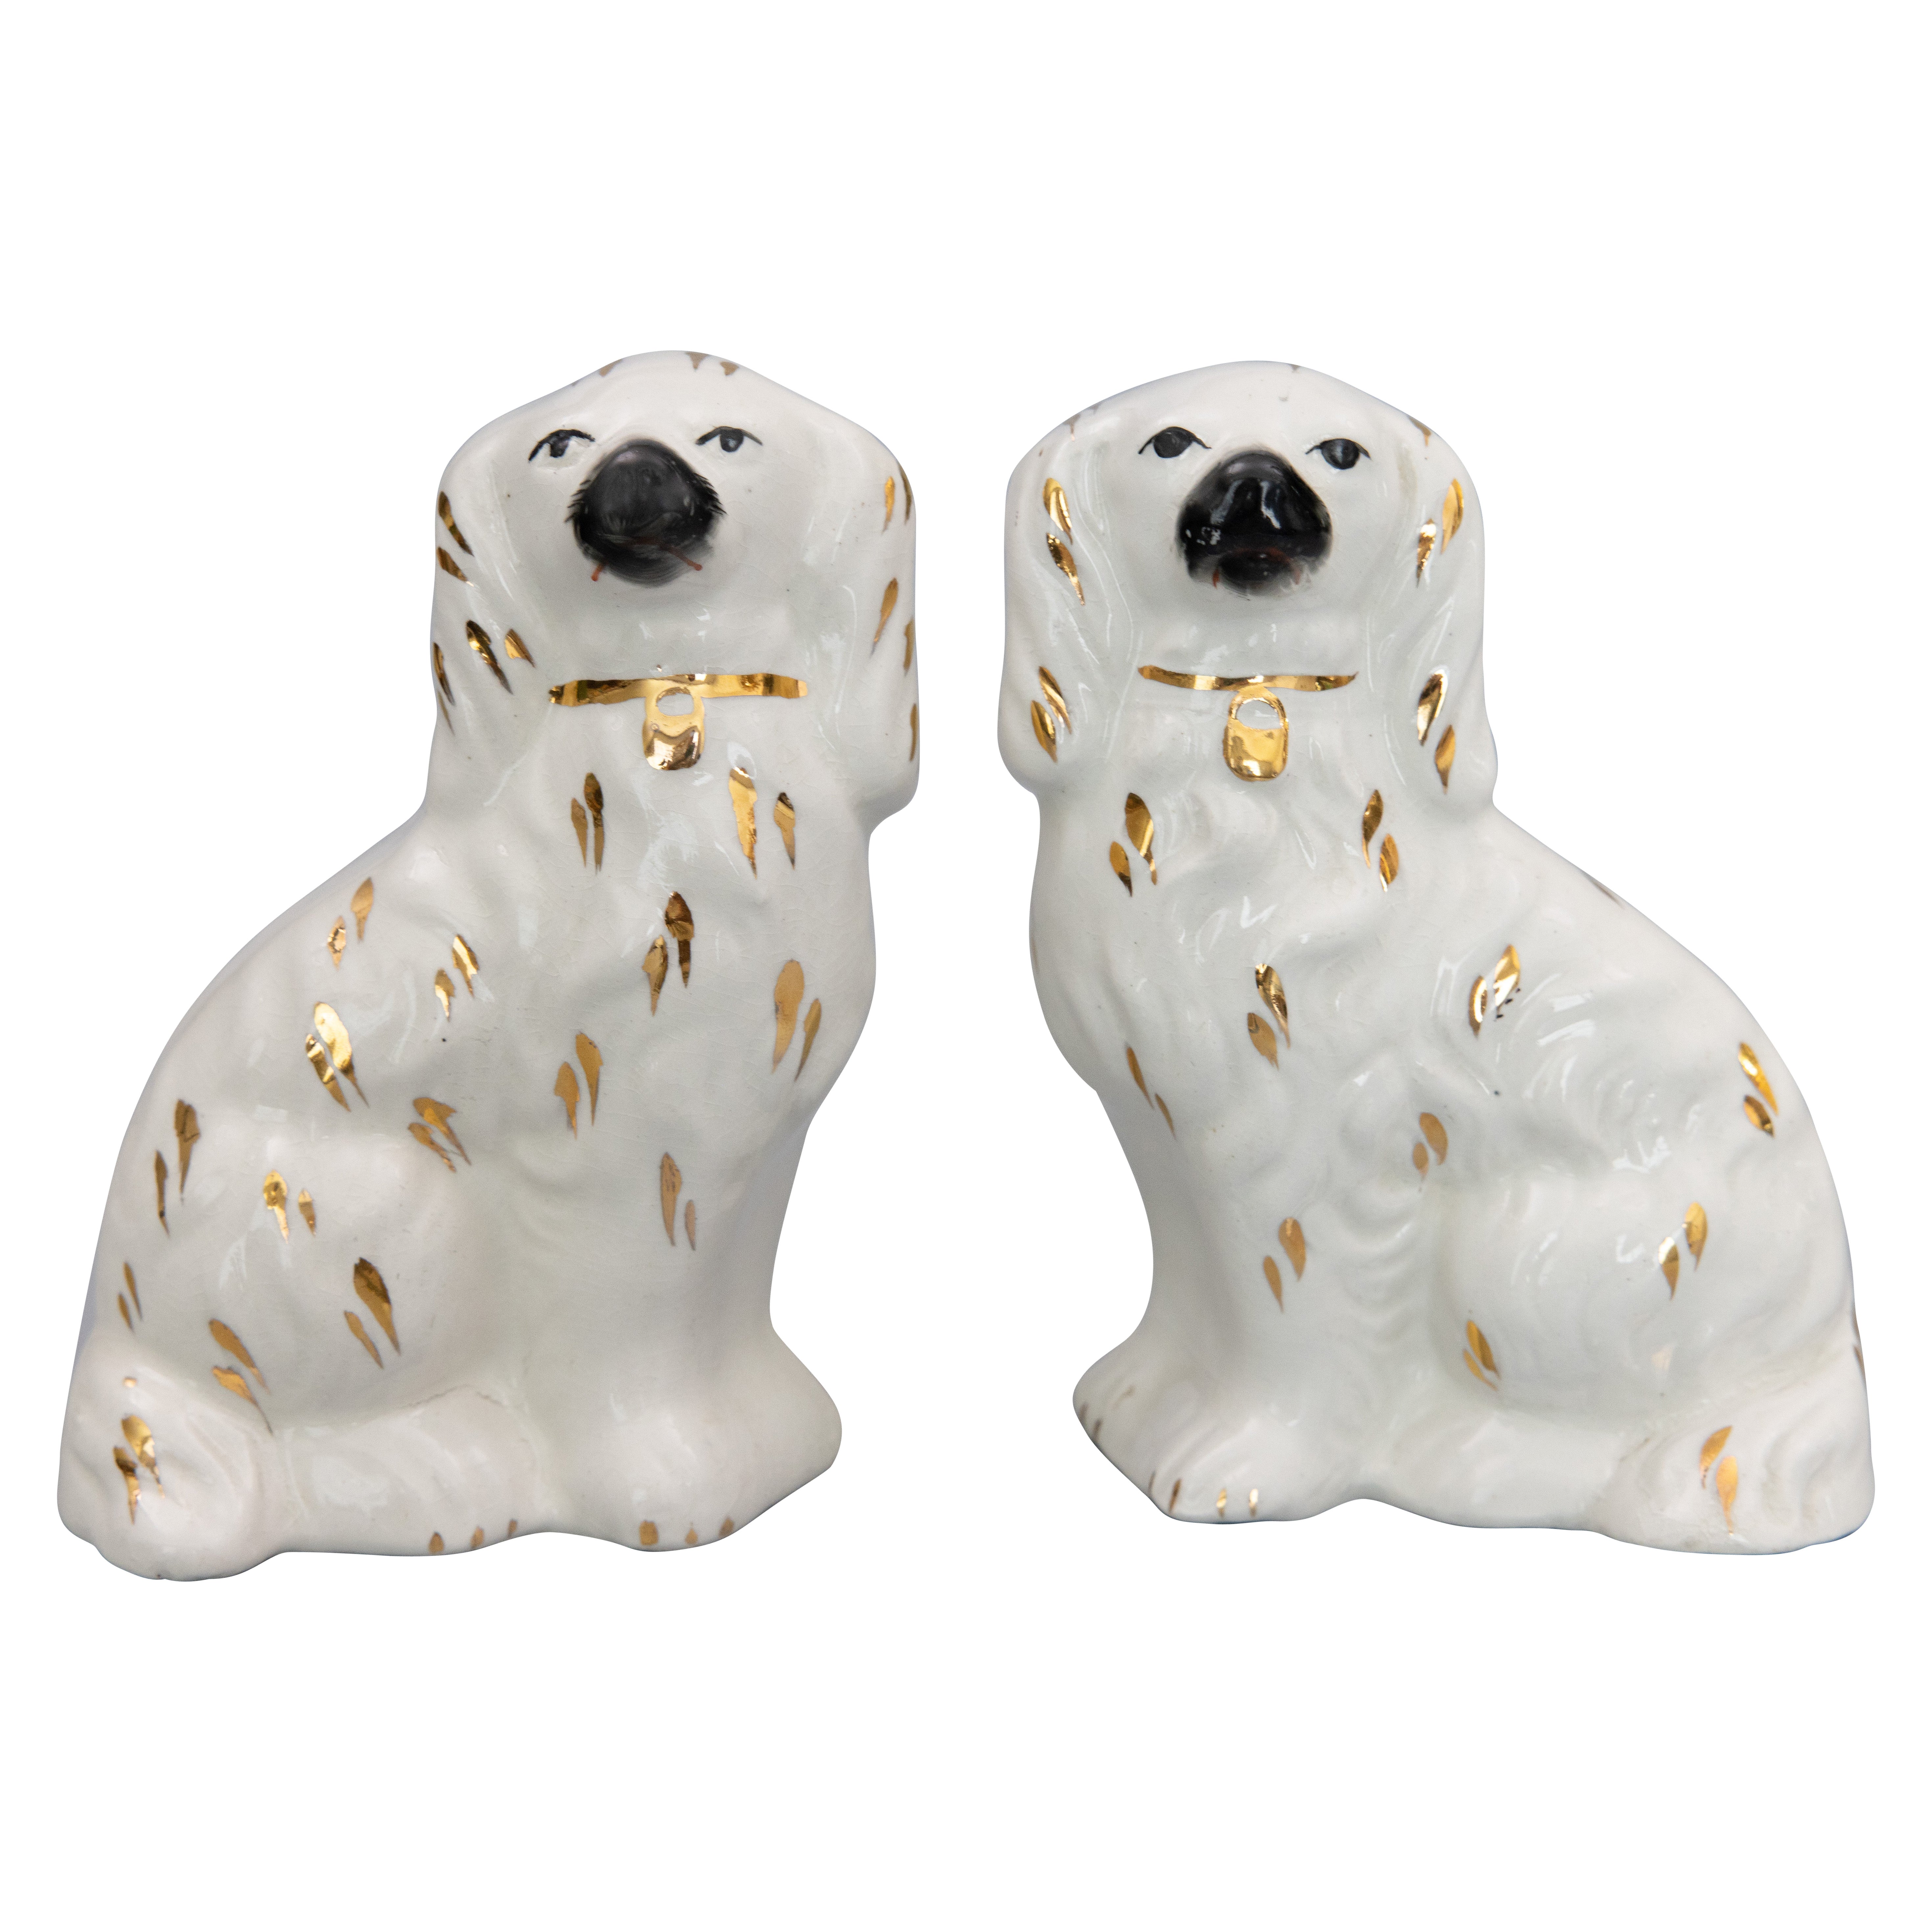 Pair of Early 20th Century English Staffordshire Spaniel Dogs Figurines